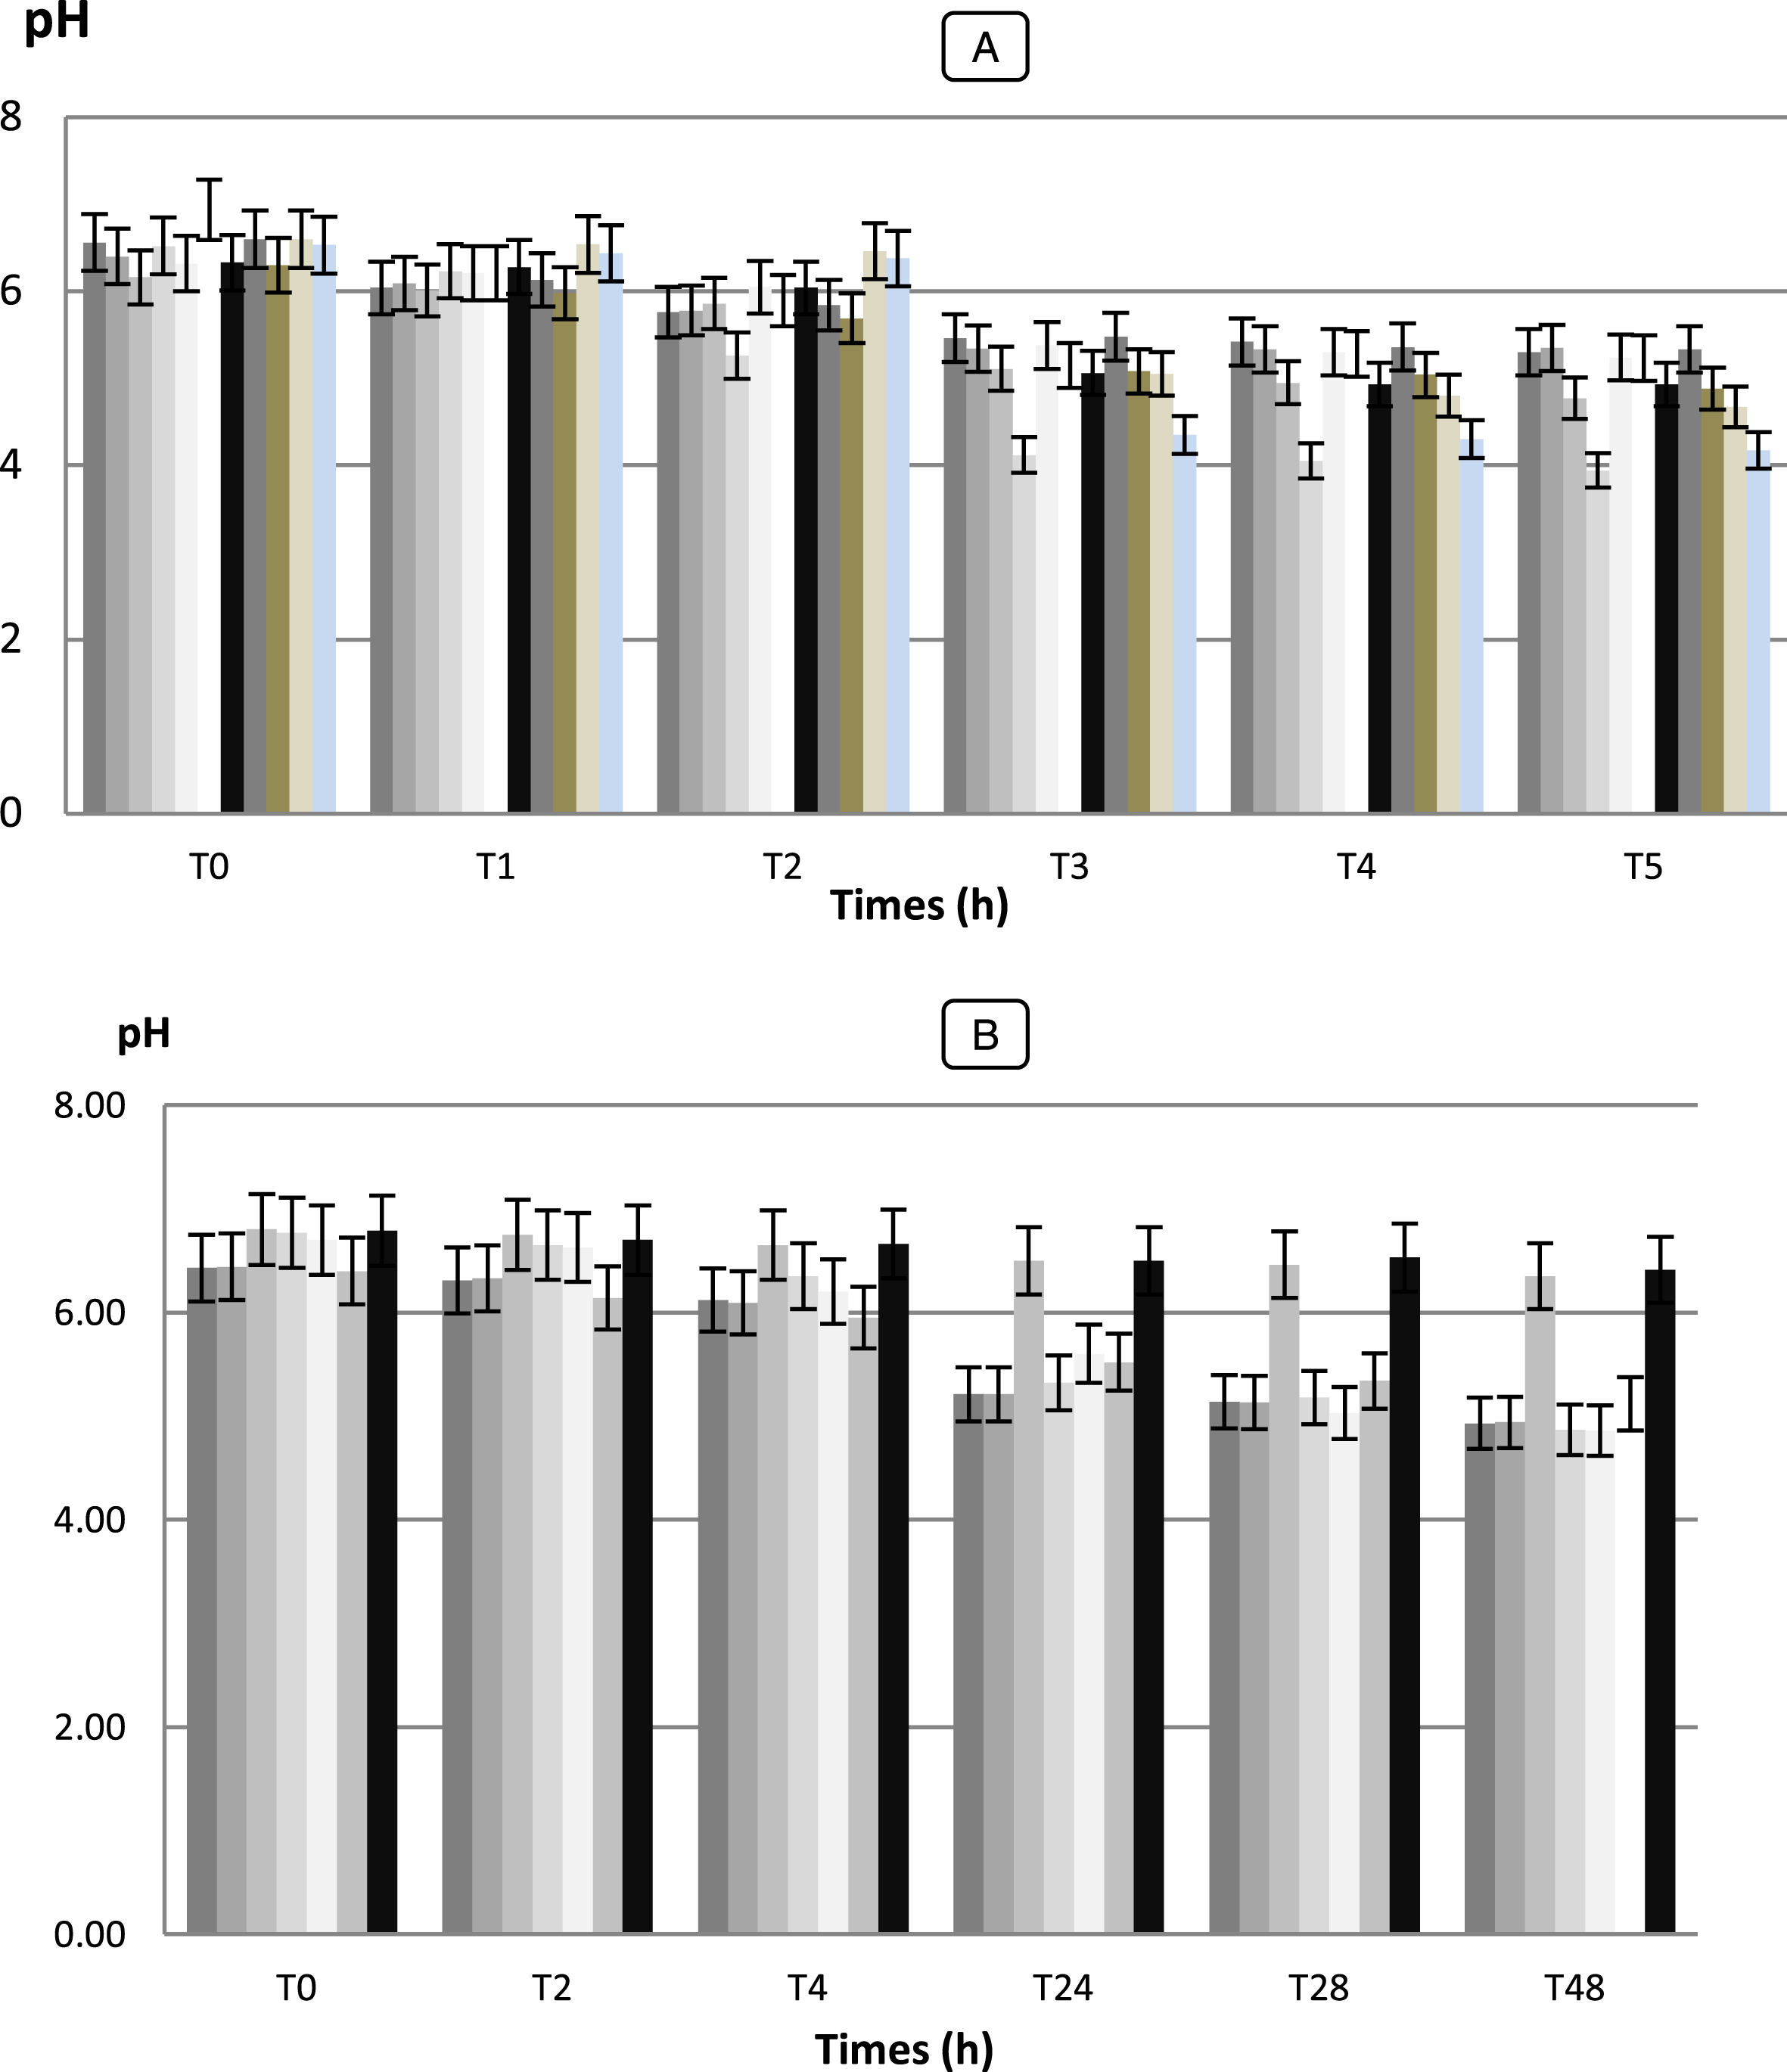 Acid production of the medium measured by recording the pH by LAB strains (A) and Bifidobacterium strains (B) selected for their capacity to survival during passage through the gastro-intestinal tract. Data points are shown with 02-h intervals. Determinations were carried out twice with a maximum standard deviation of±0.05. The LAB and Bifidobacterium strains were added at a level of 106 CFU/g. Error bars show the SD of the mean of triplicate analyses. (A) LAB strains:  Lc. cremoris (Lc 02),  Lc. lactis (Lc 03),  Pc. cerevisiae (Pc 01),  Pc. acidilactici (Pc 02),  Sc. boris (Sc 01),  Sc. thermophilus (Sc 02),  Sc. agalactiae (Sc 03),  Ec. Faecium (Ec 01),  Ec. Faecalis (Ec 02),  Lb. bulgaricus (Lb 01),  Lb. lactis (Lb 02).  Bf. breve (BHI 01),  Bf. infantis (BHI 03),  Bf. Adolescentis (BHI 04),  Bf. bifidum (BHI 05),  Bf. Longum (BHI 07),  Bf. thermophilum (BHI 08),  Bf. suis (BHI 33).